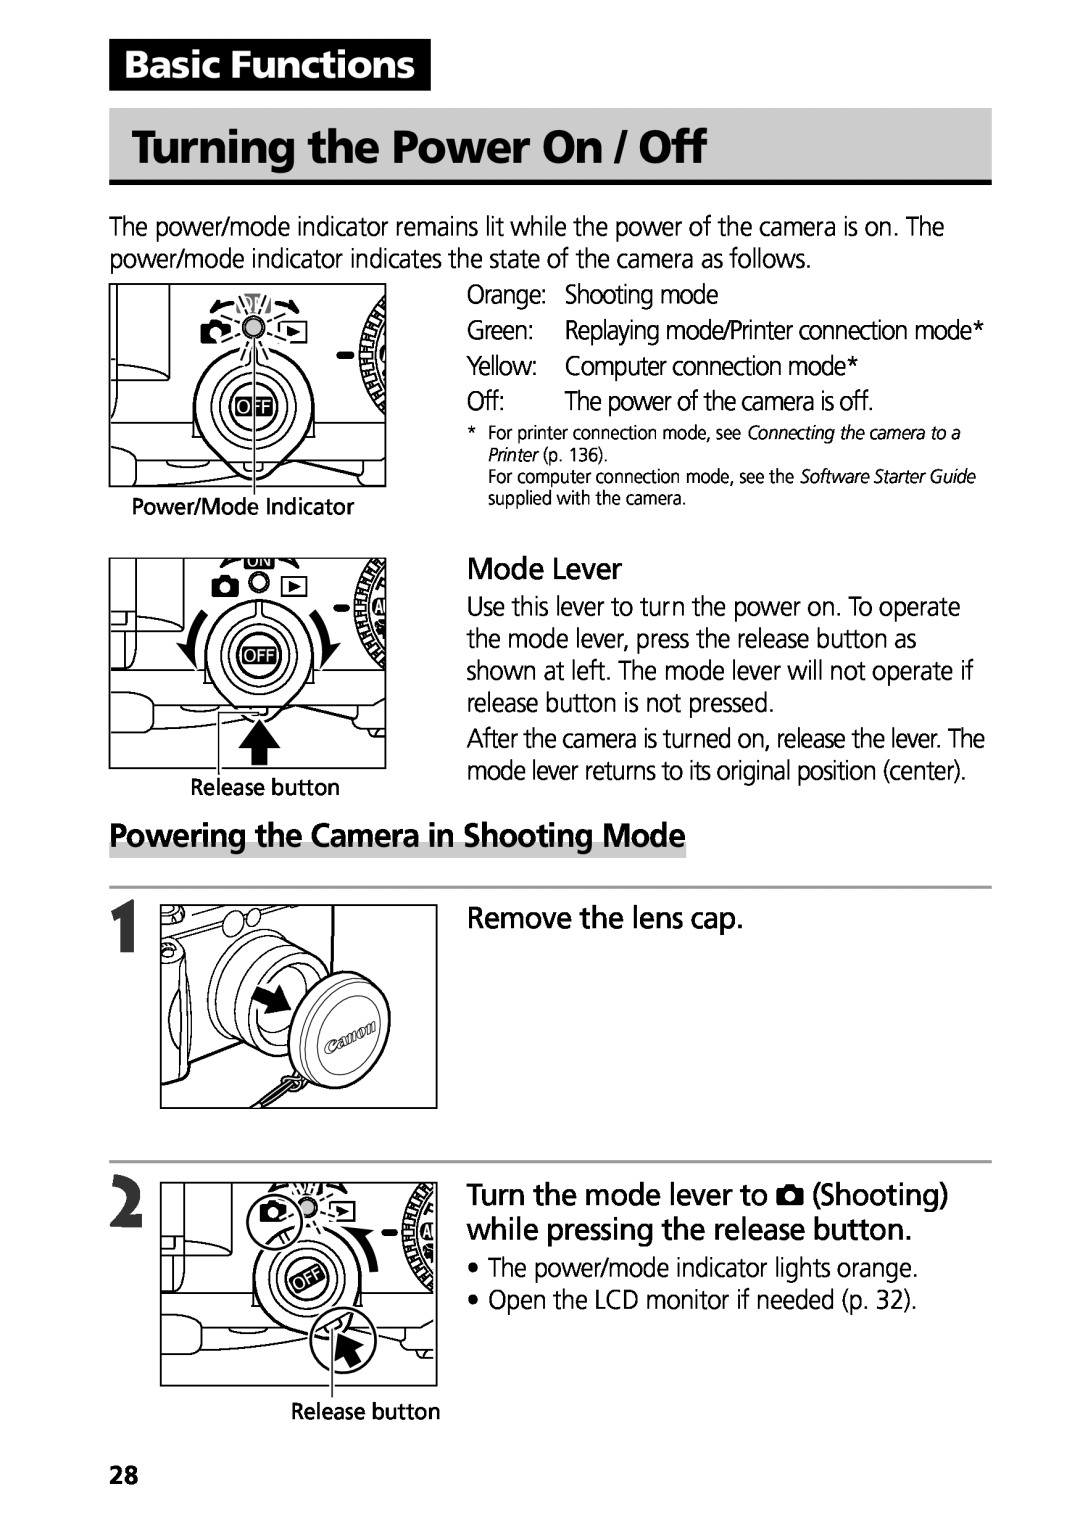 Canon G3 manual Turning the Power On / Off, Basic Functions, Powering the Camera in Shooting Mode, Mode Lever 